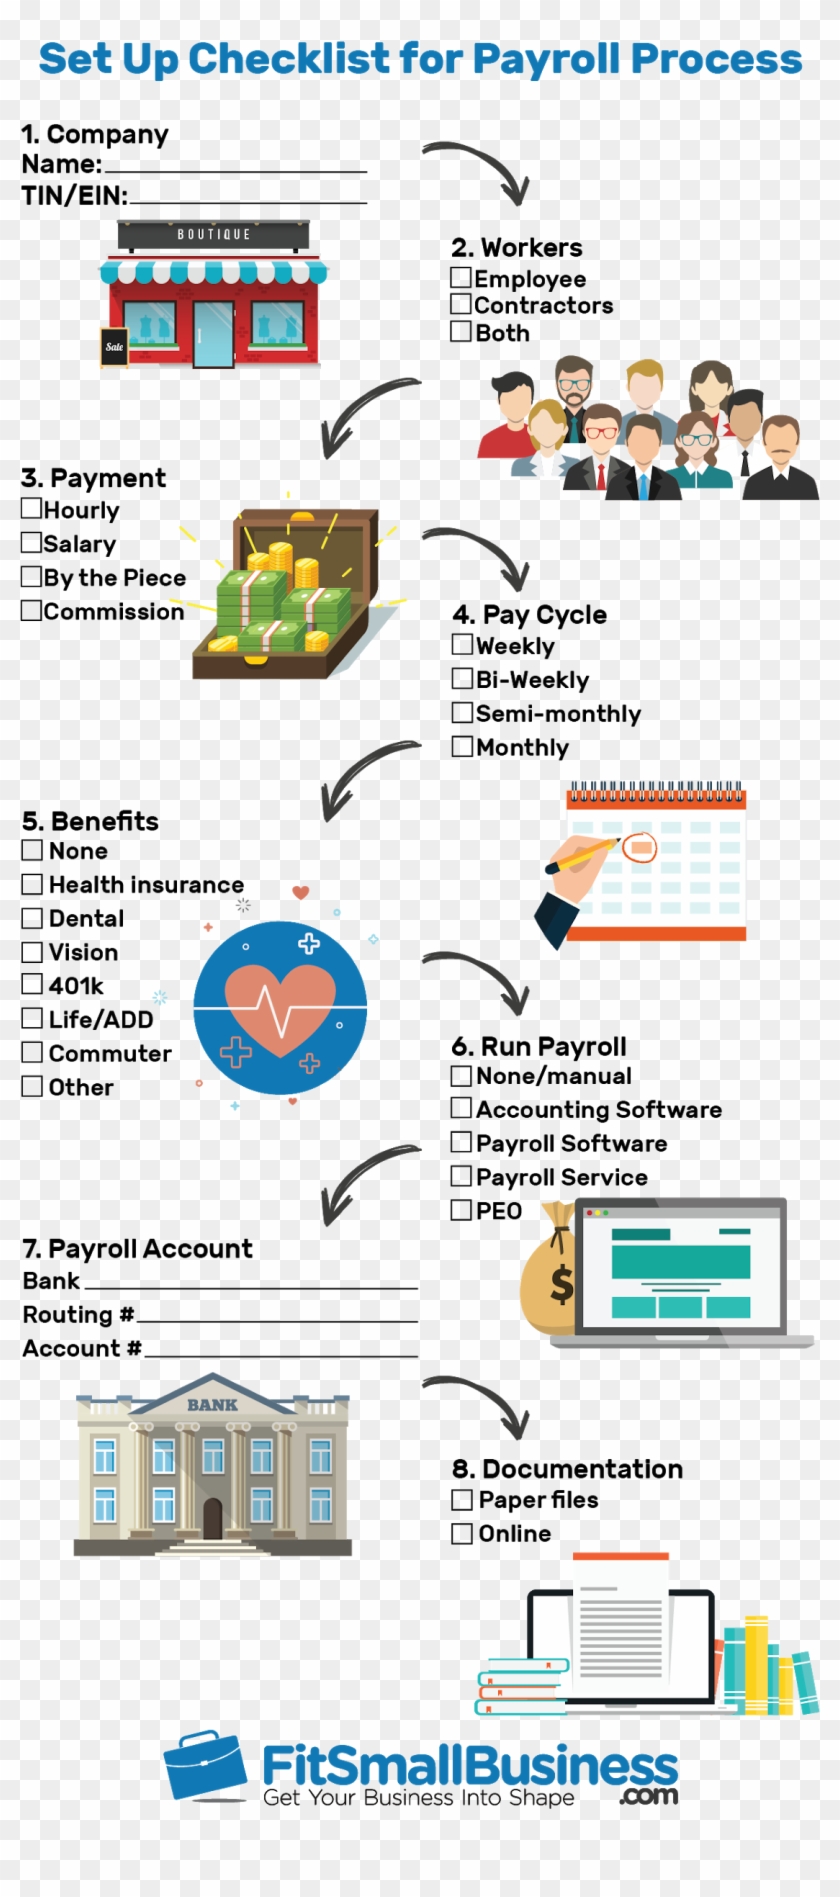 Eight Steps To Set Up Your Payroll Process - Process And Steps For Preparation For Payroll Clipart #5218911